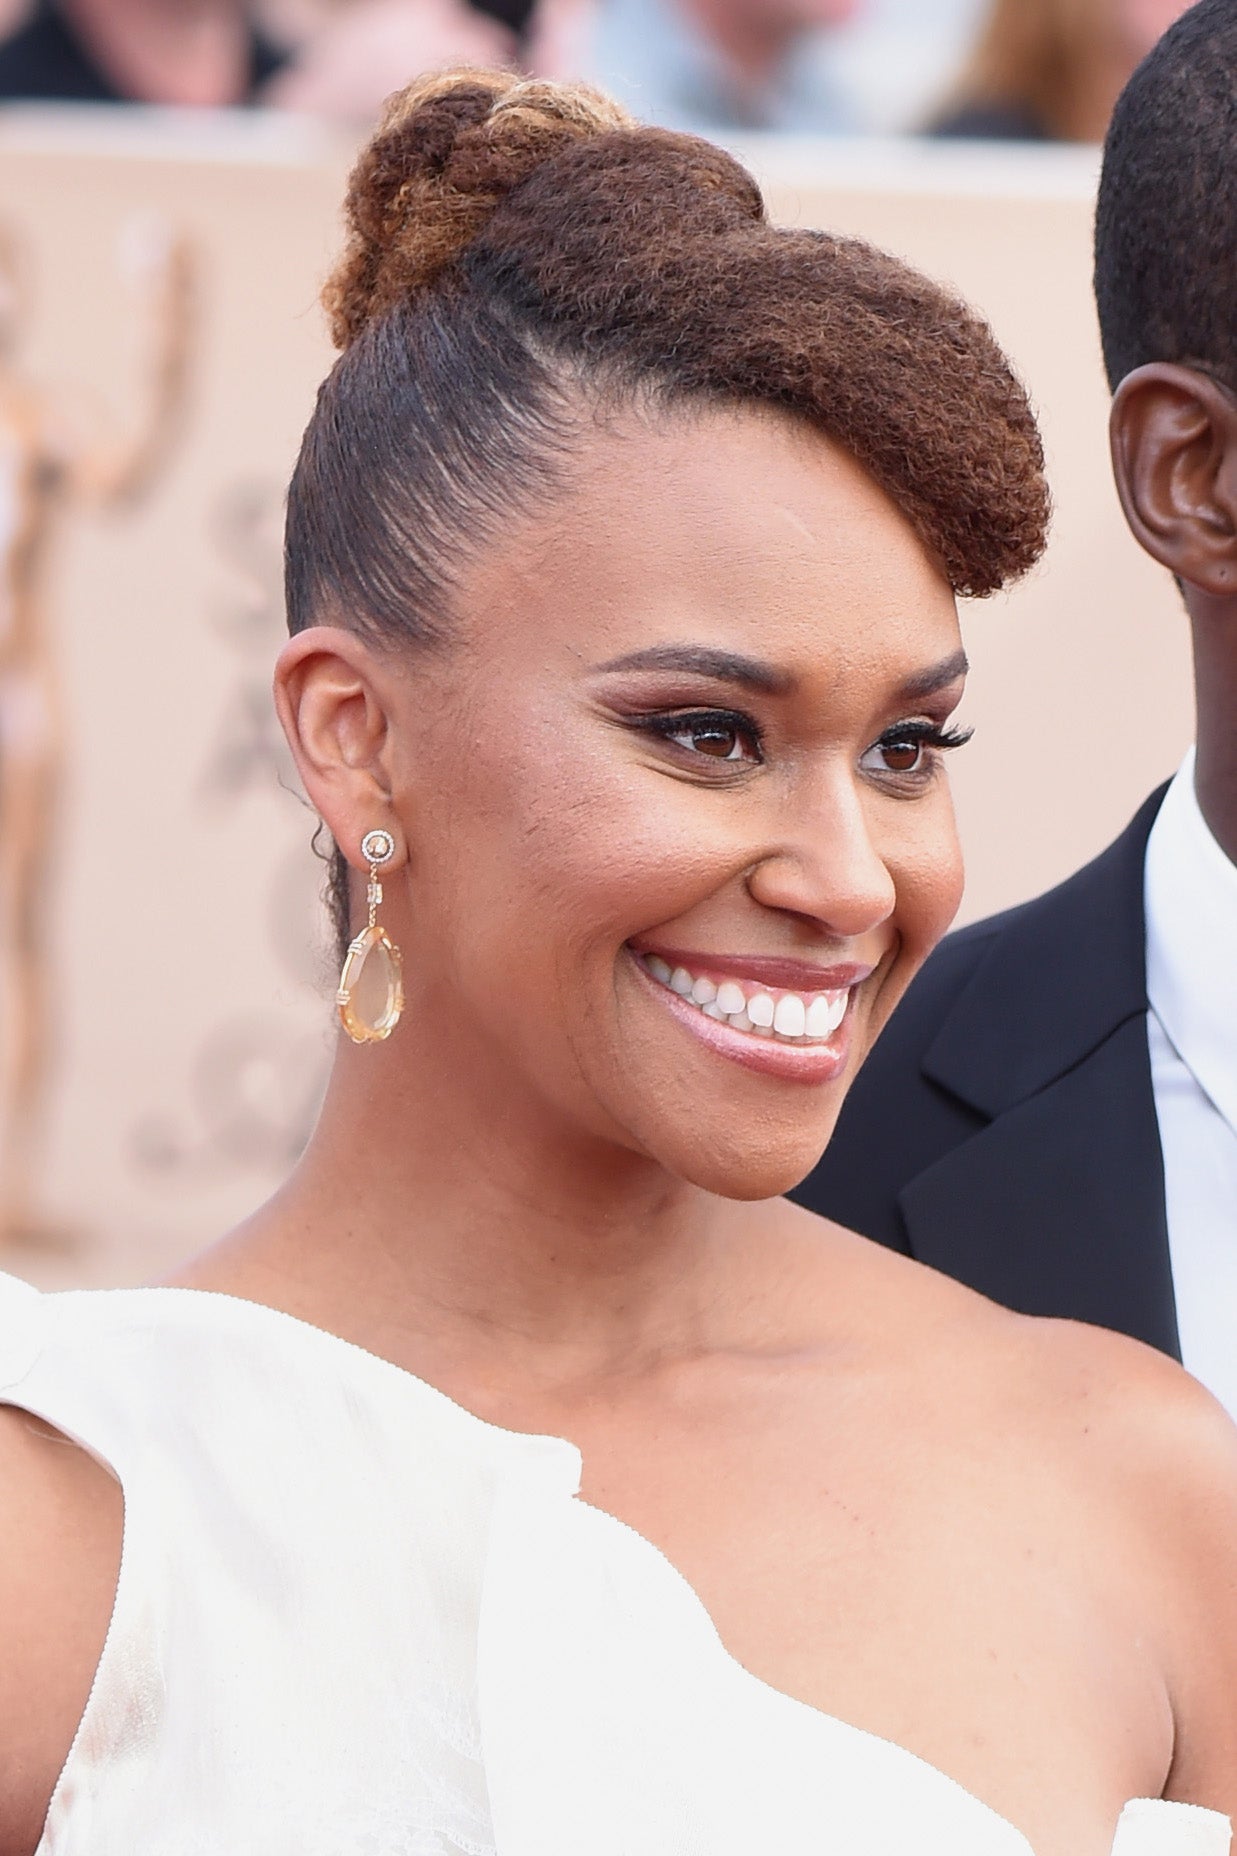 Here Are The 2017 SAG Awards Beauty Looks You Definitely Need To See